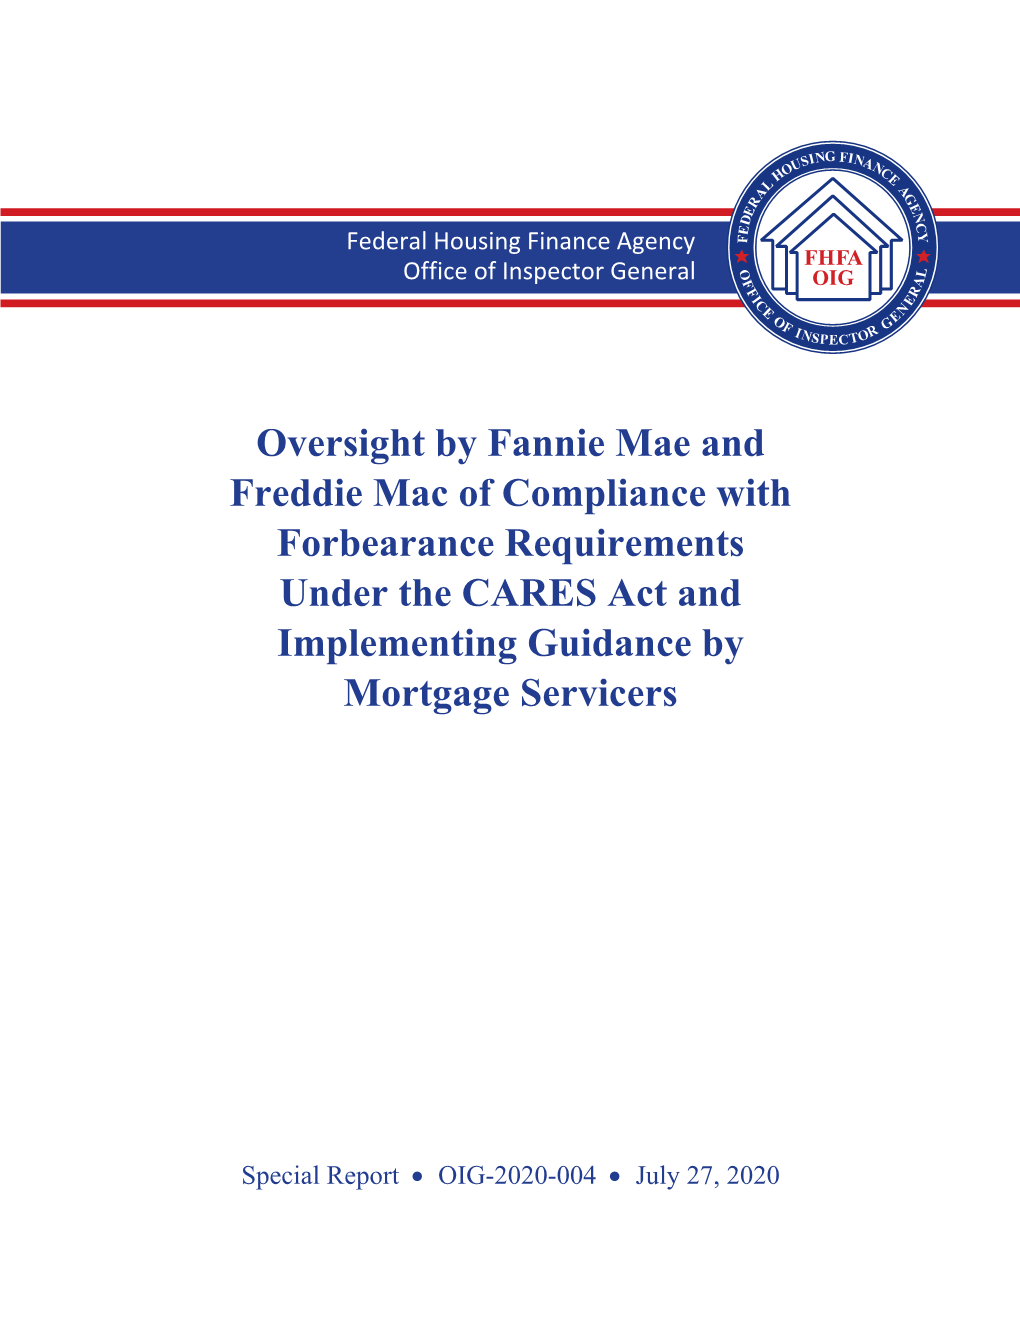 Oversight by Fannie Mae and Freddie Mac of Compliance with Forbearance Requirements Under the CARES Act and Implementing Guidance by Mortgage Servicers